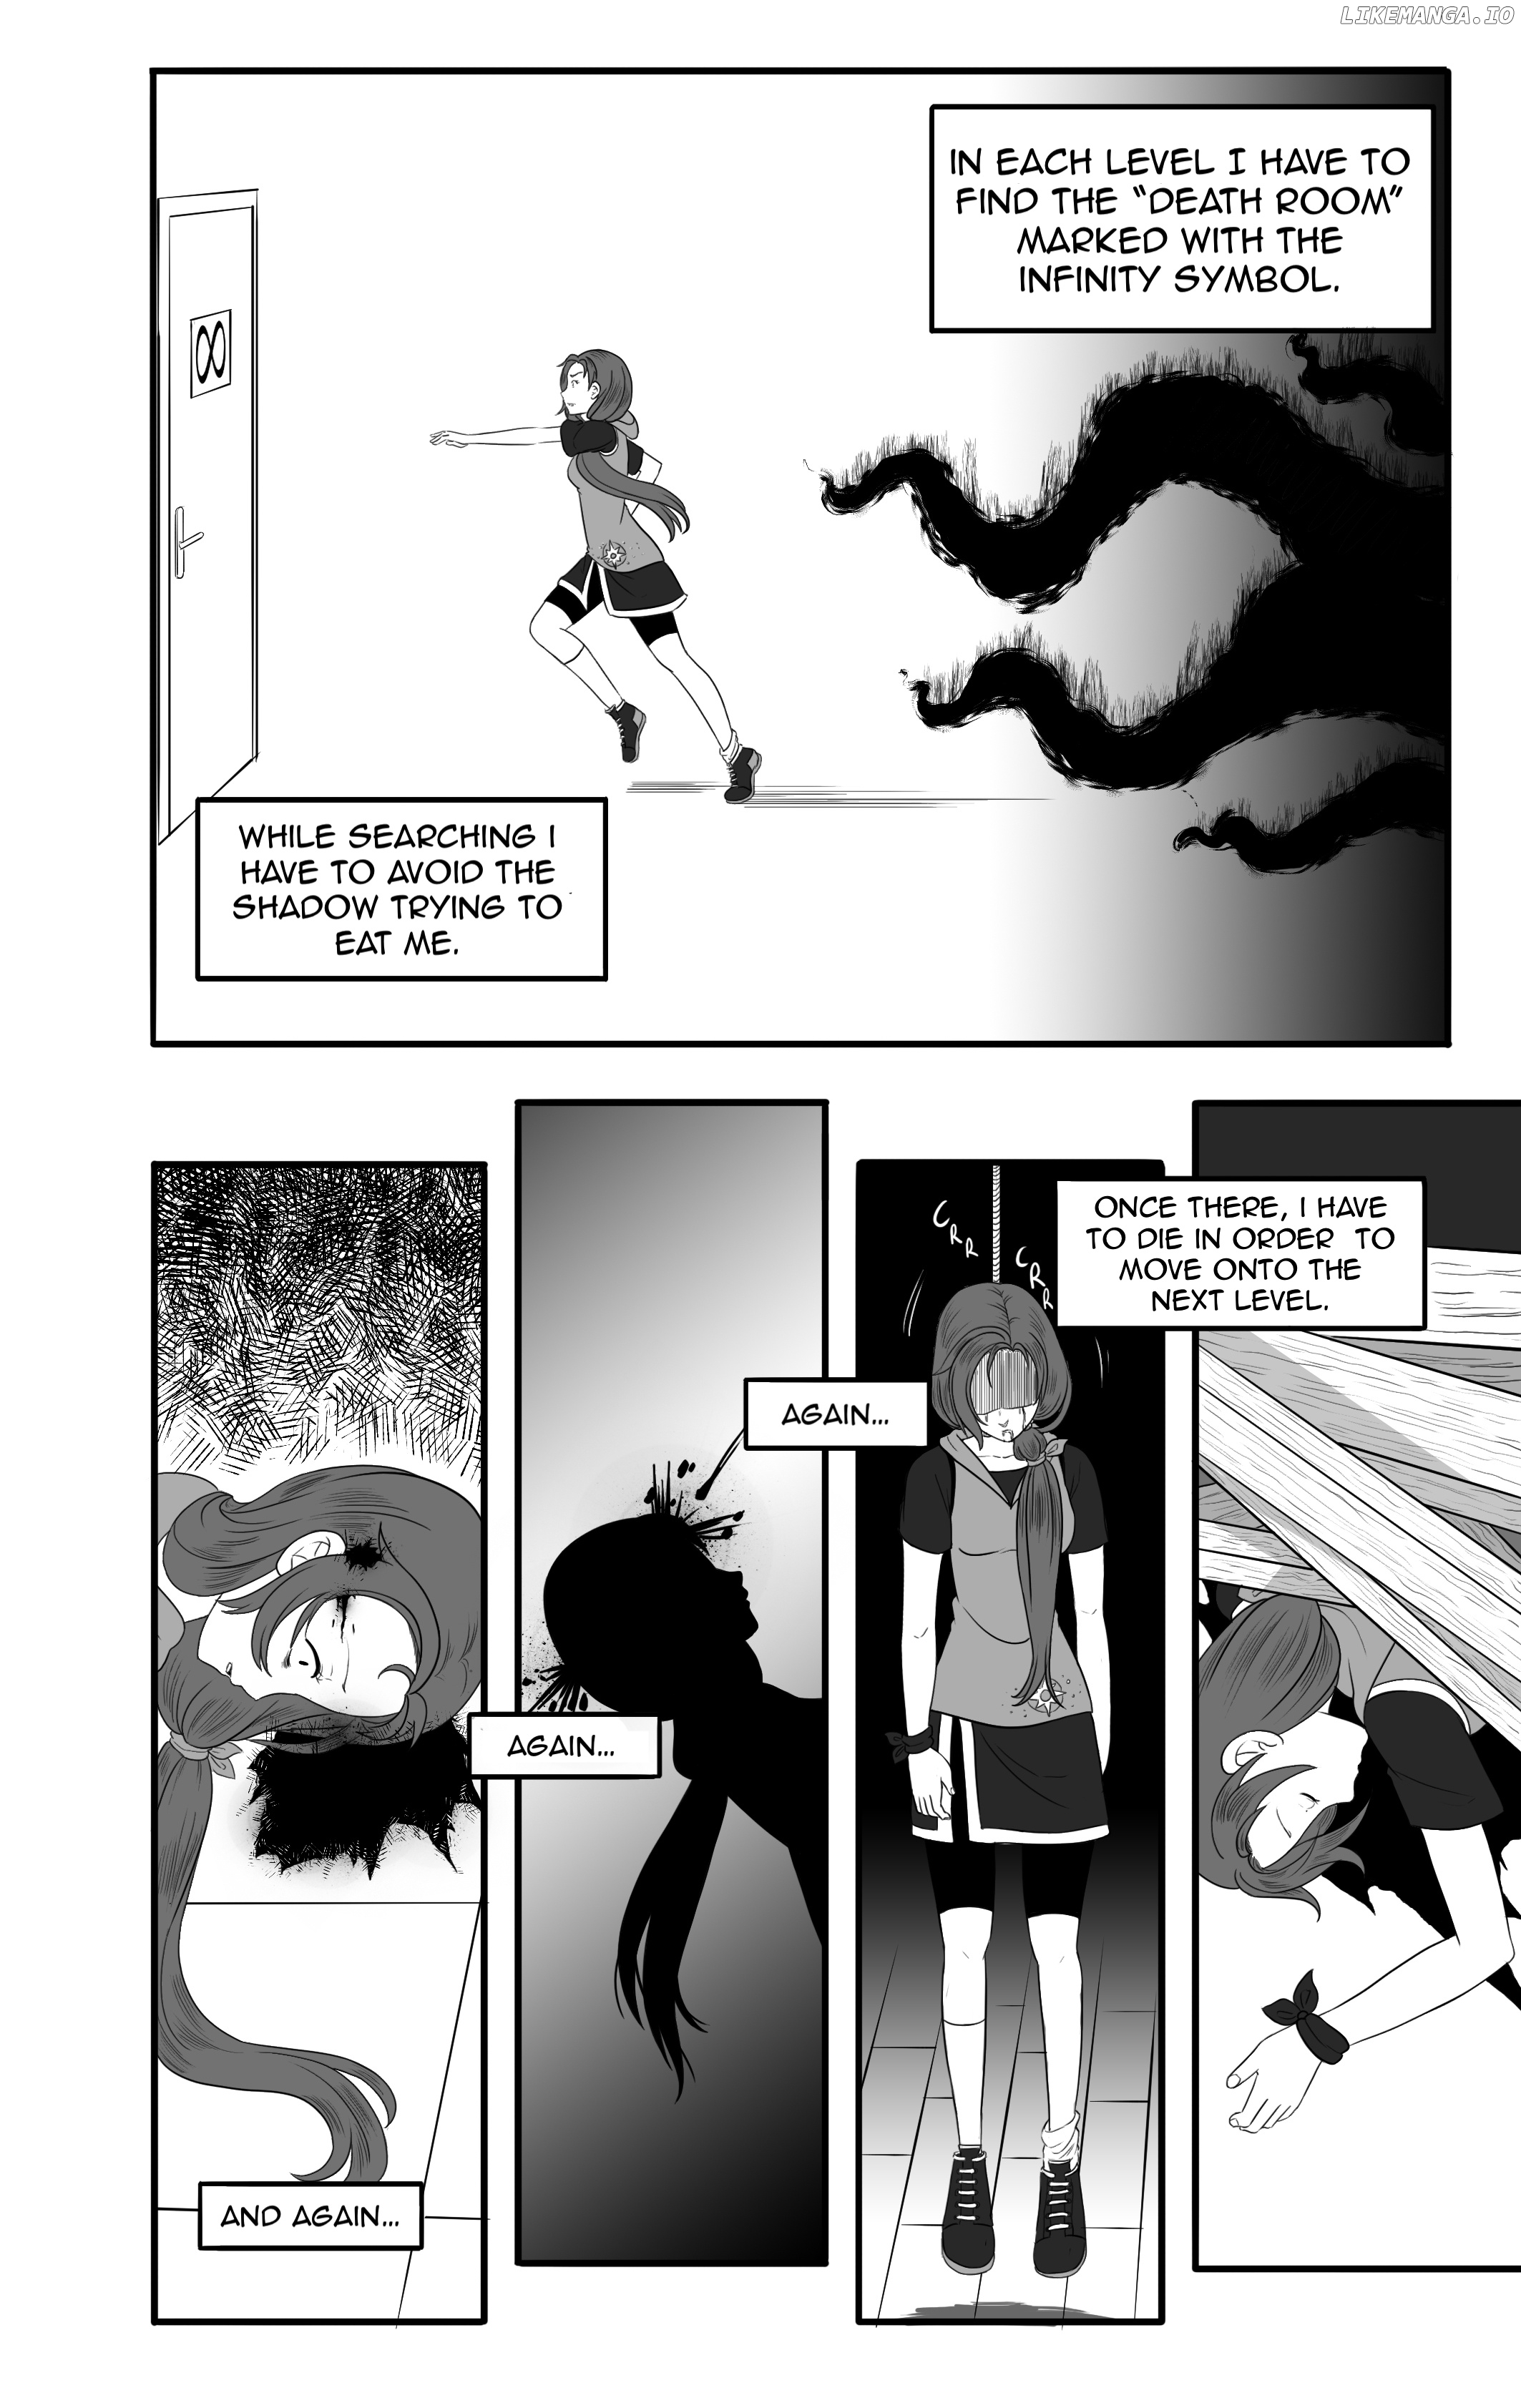 While chapter 3 - page 4